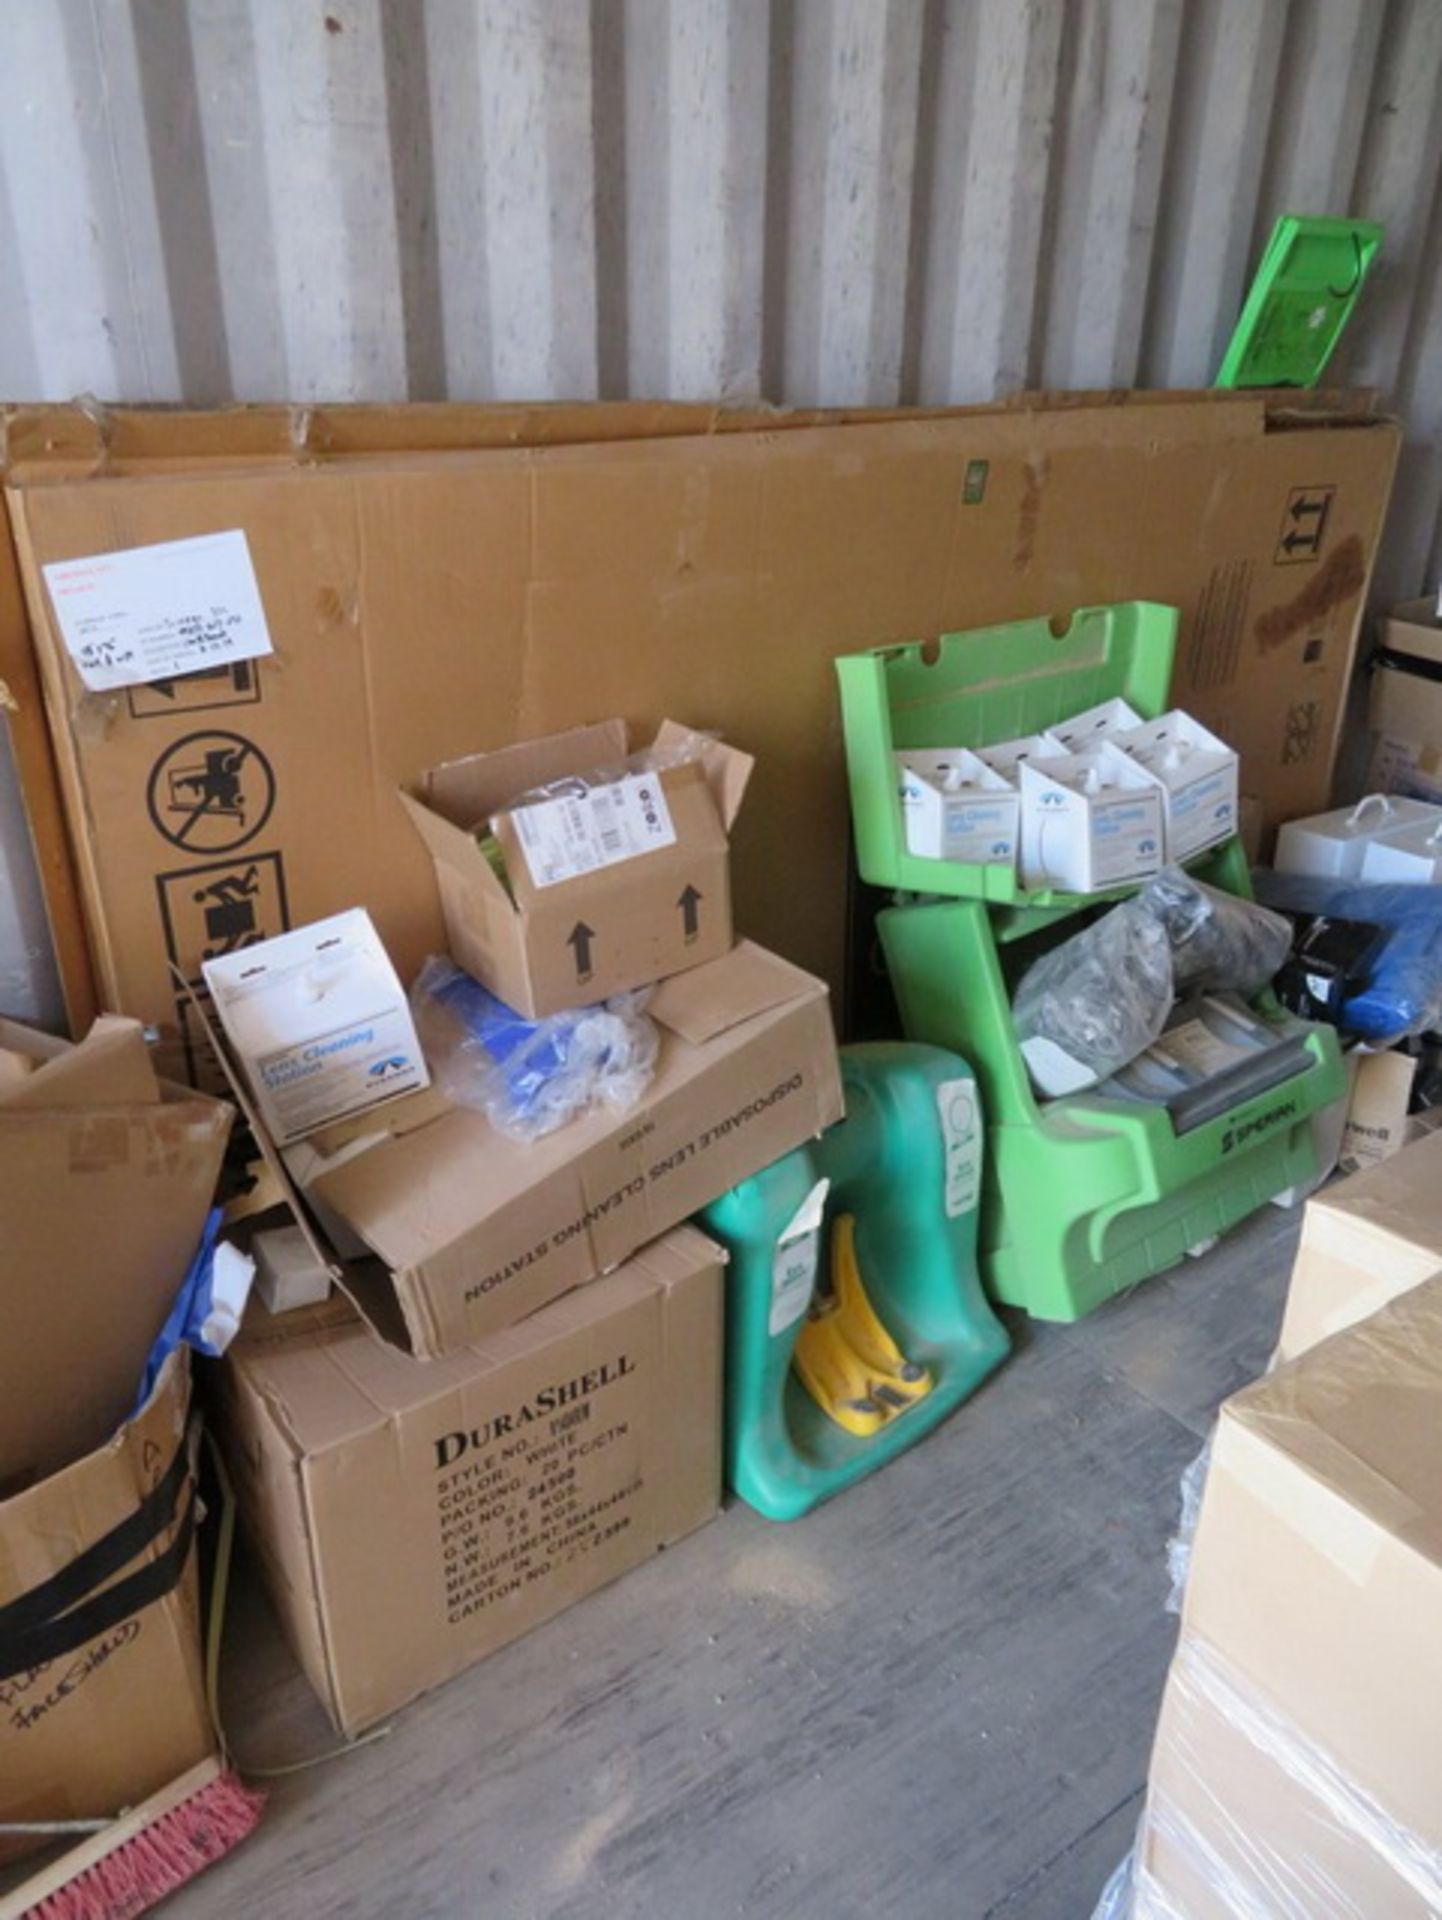 Contents of Shipping Container. To Include 1/2" PVDF Tubing, Safety Glasses, Safety Signs, - Image 12 of 51